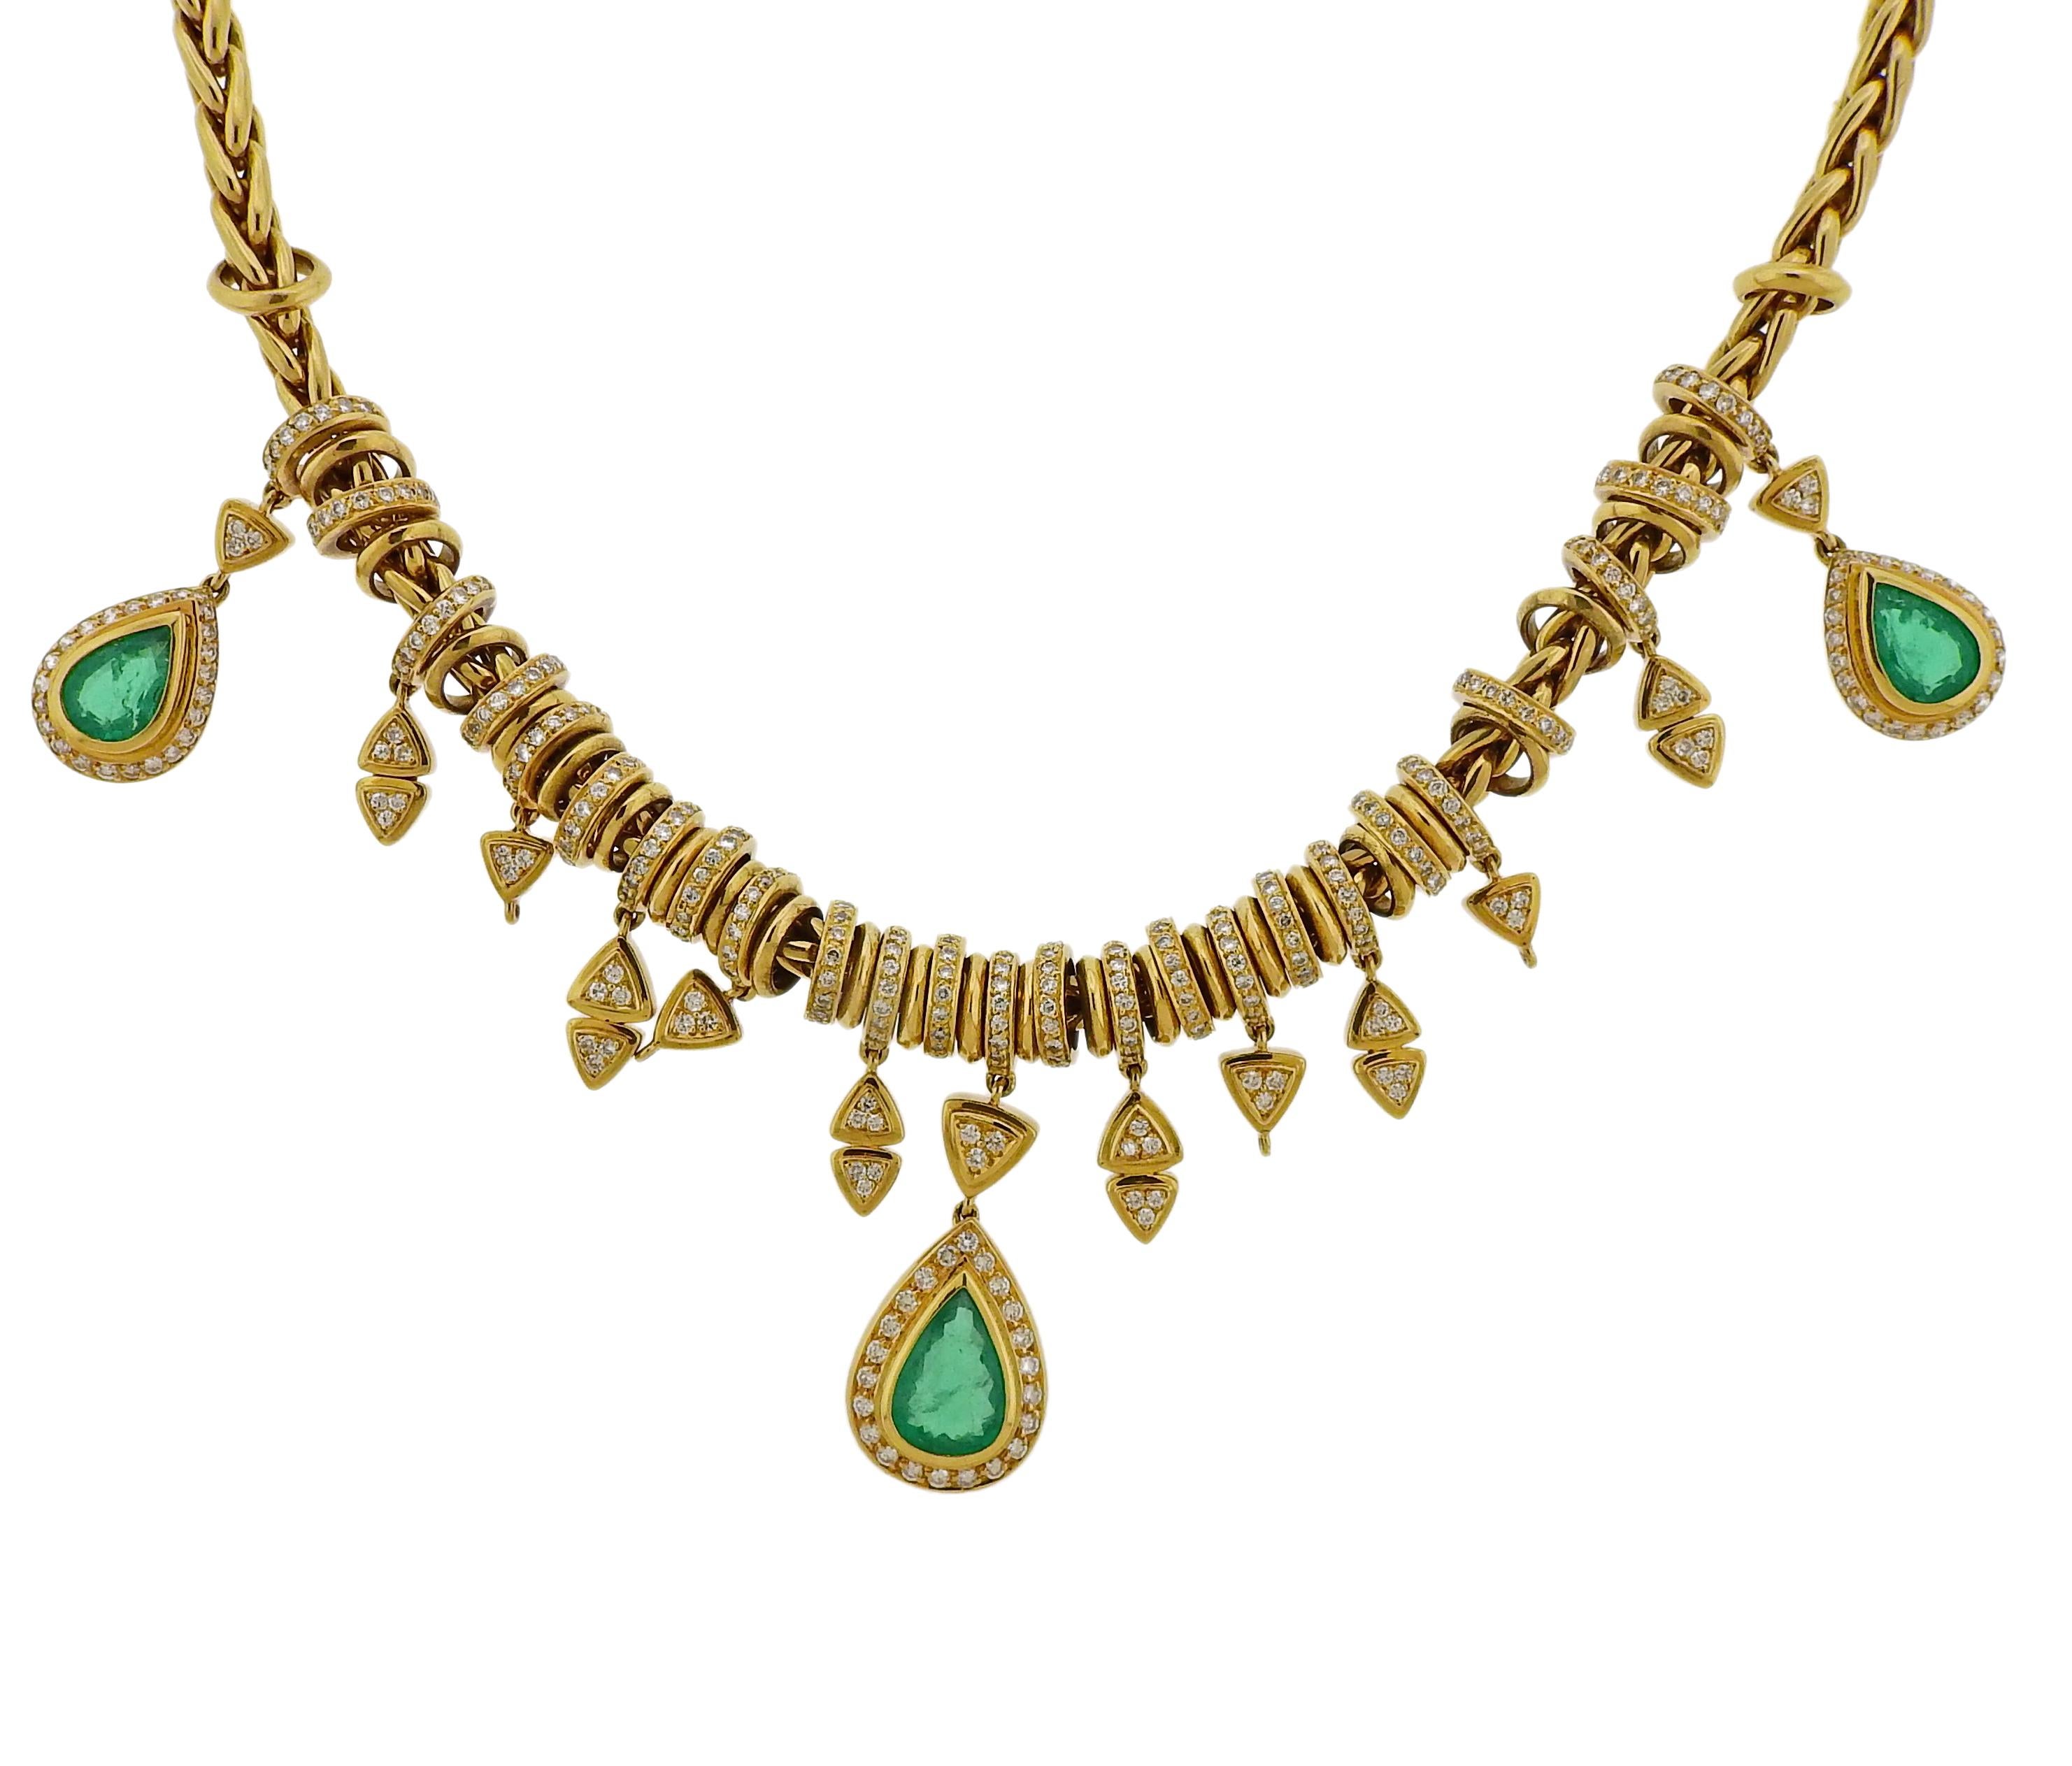 18k yellow gold pendant necklace by H Stern, featuring teardrop emeralds and approx. 1.60ctw in diamonds. Necklace is 16.75